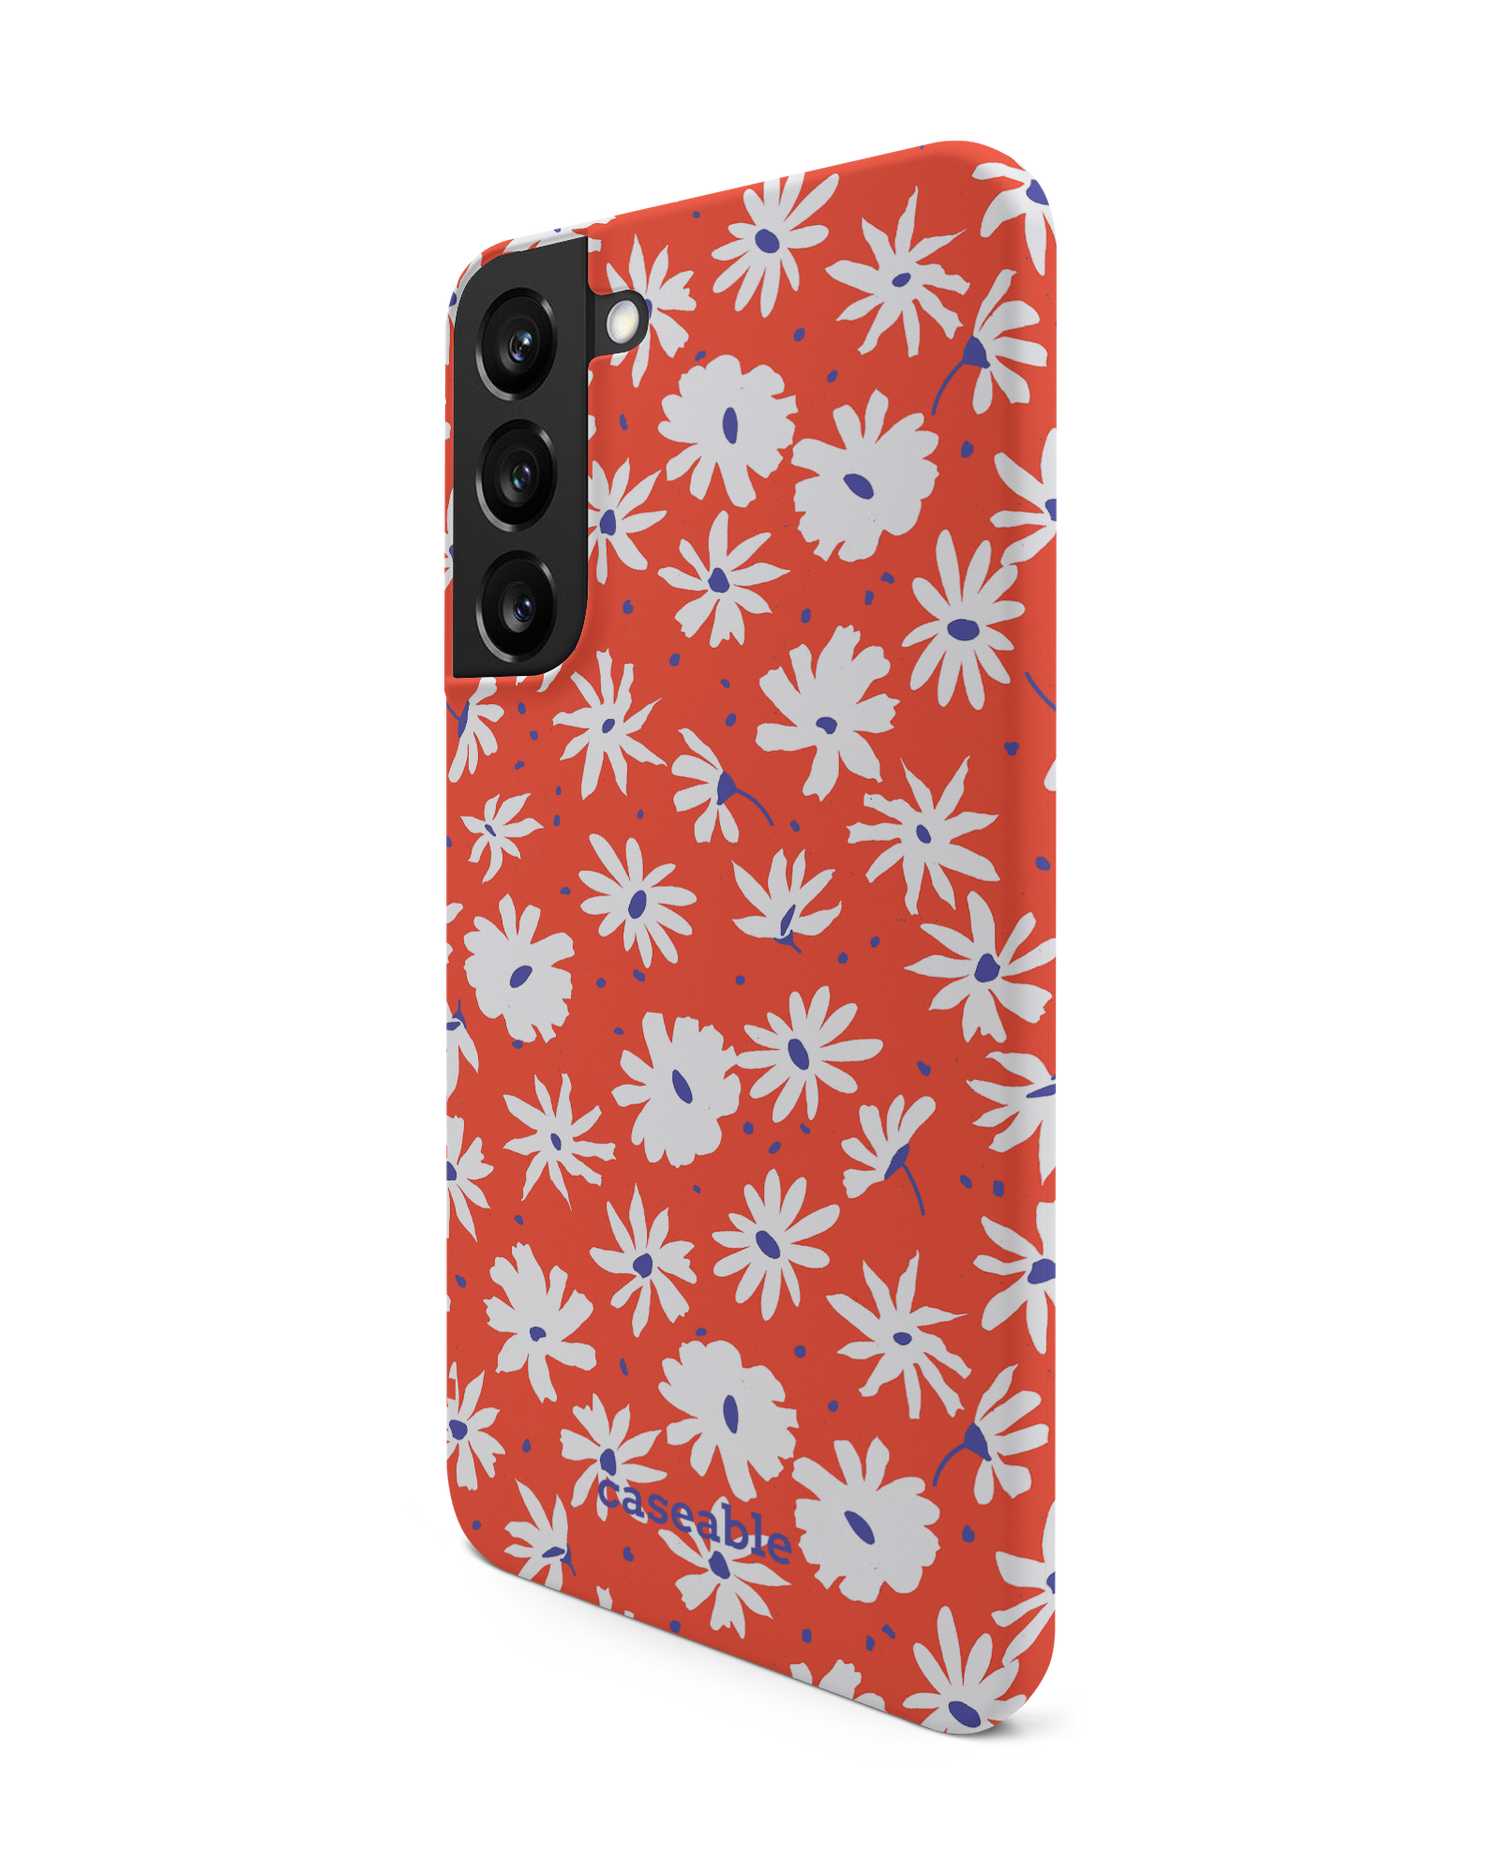 Retro Daisy Hard Shell Phone Case Samsung Galaxy S22 Plus 5G: View from the right side